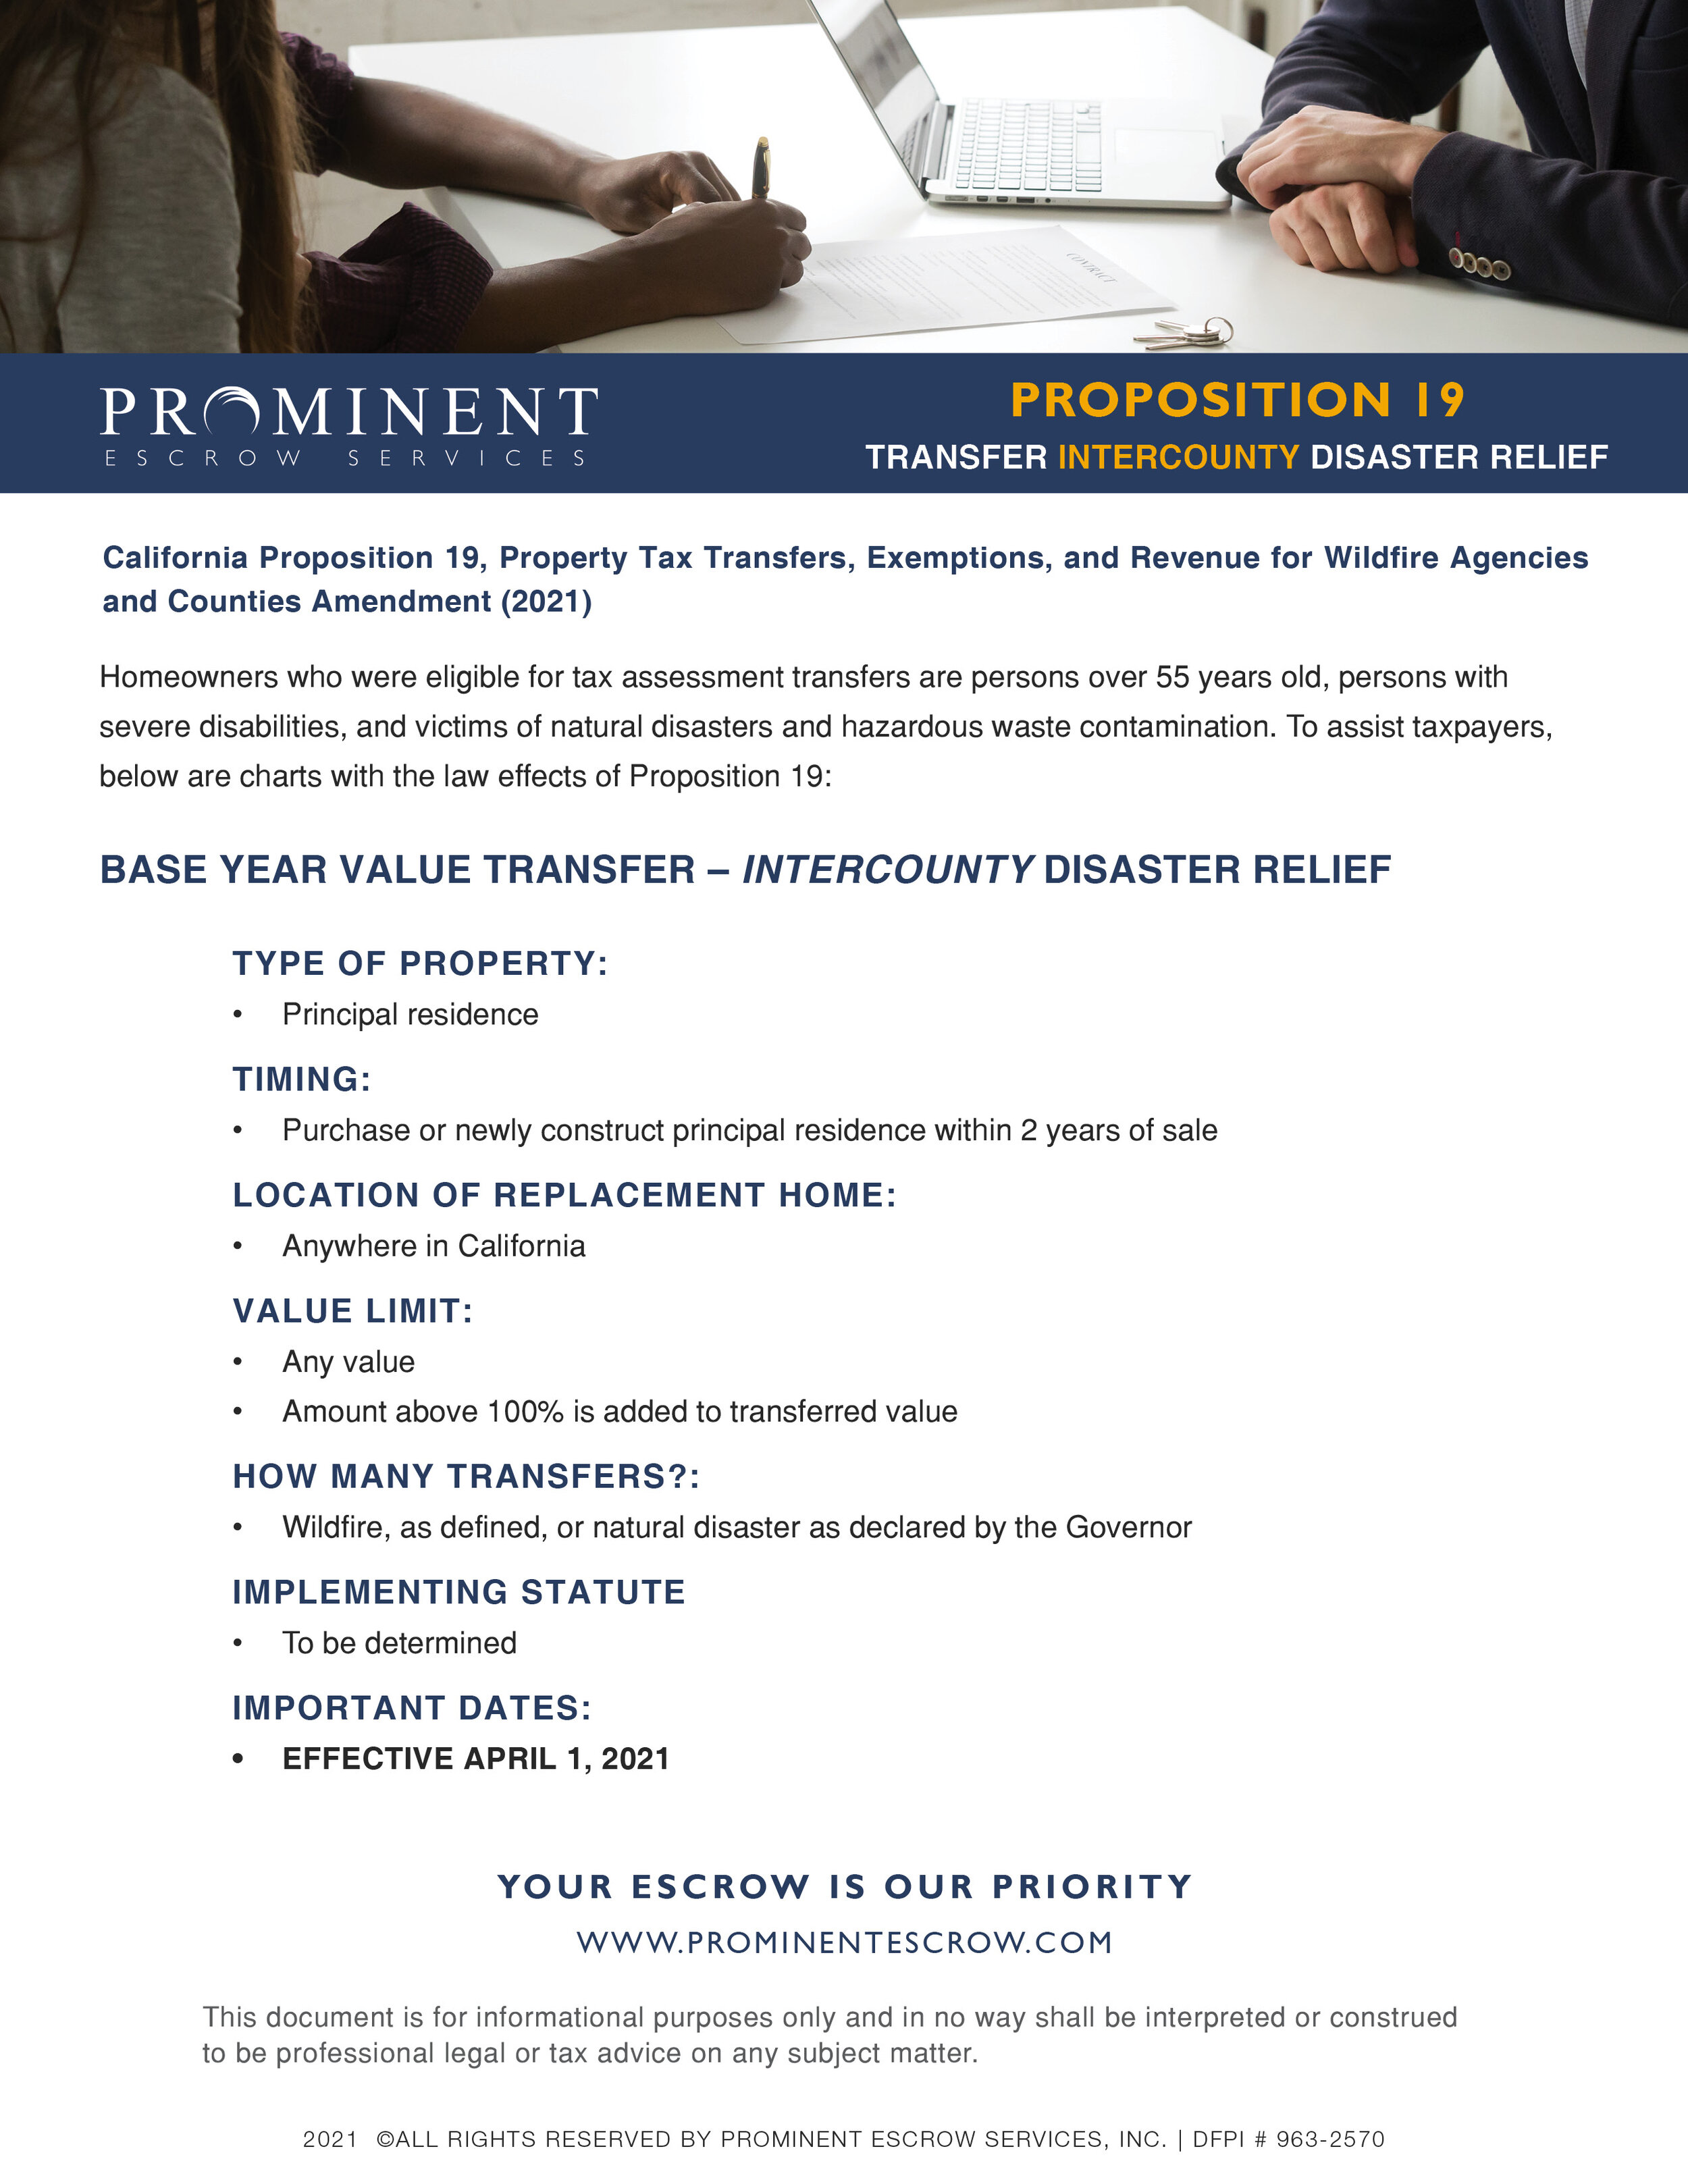 Prop 19 Transfer INTERCOUNTY Disaster Relief